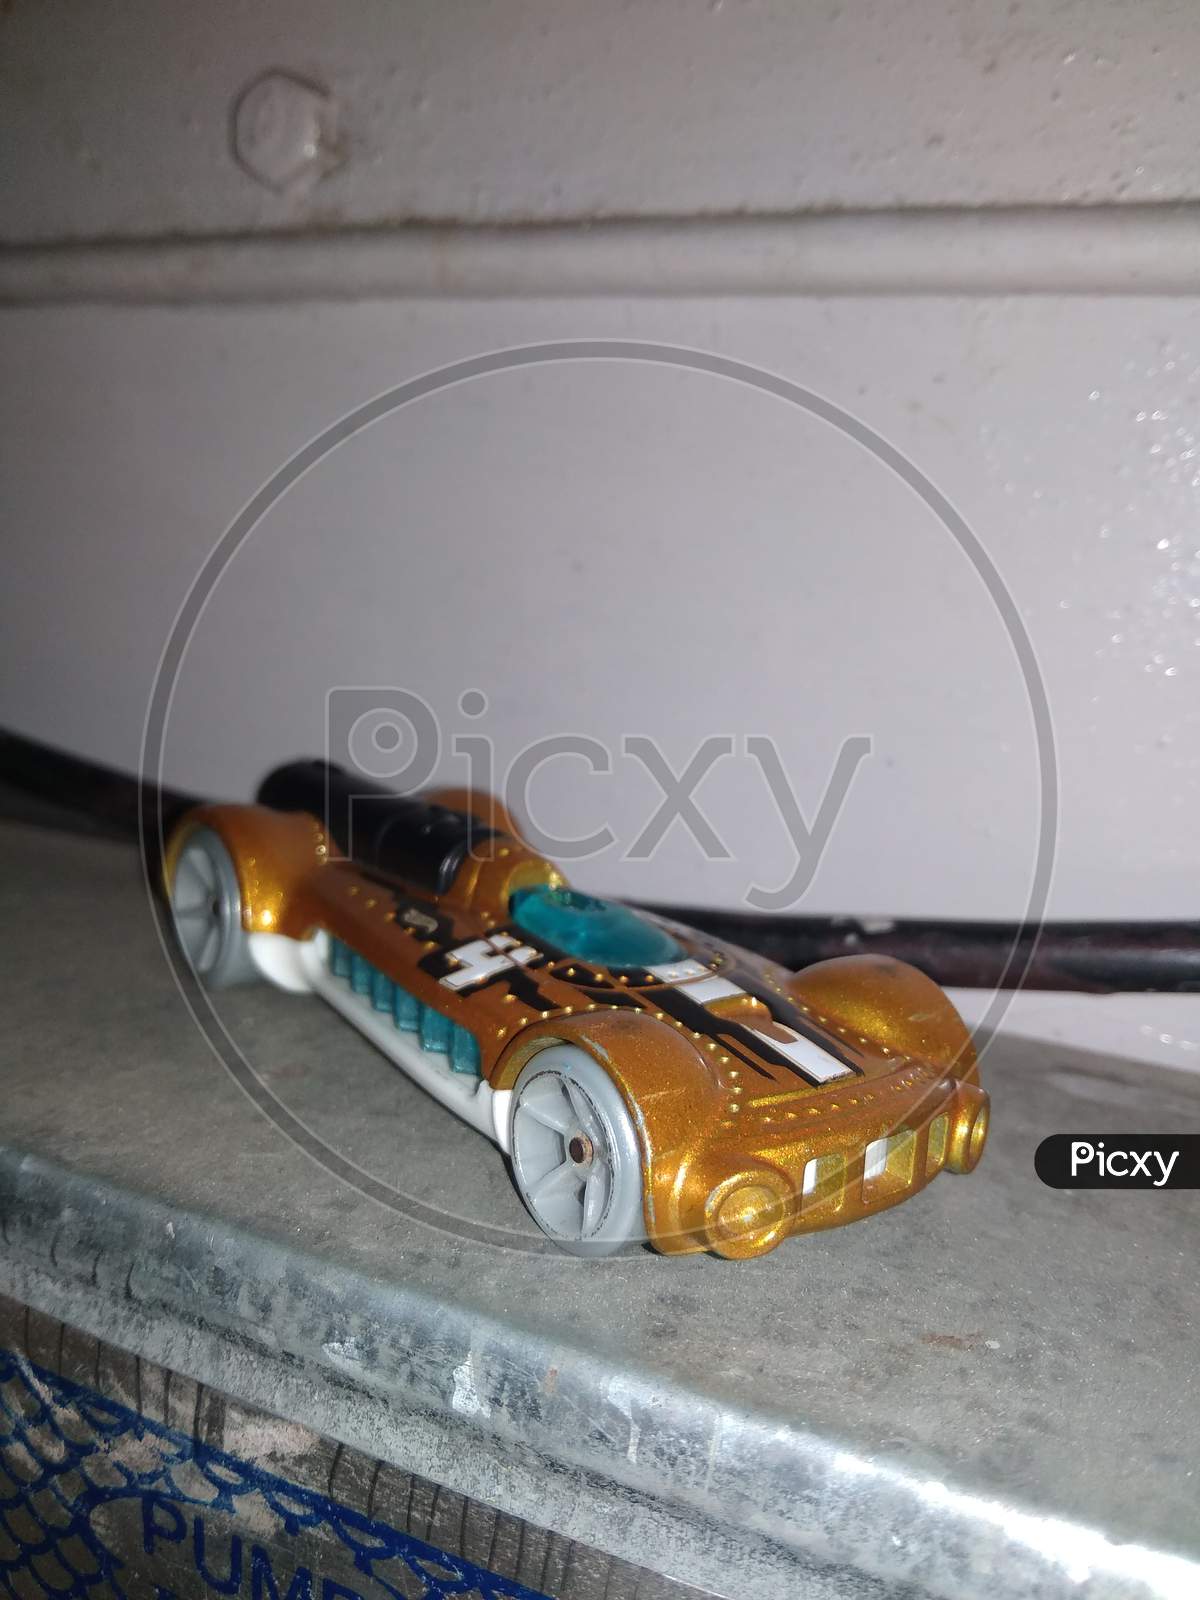 Toy car looking awesome